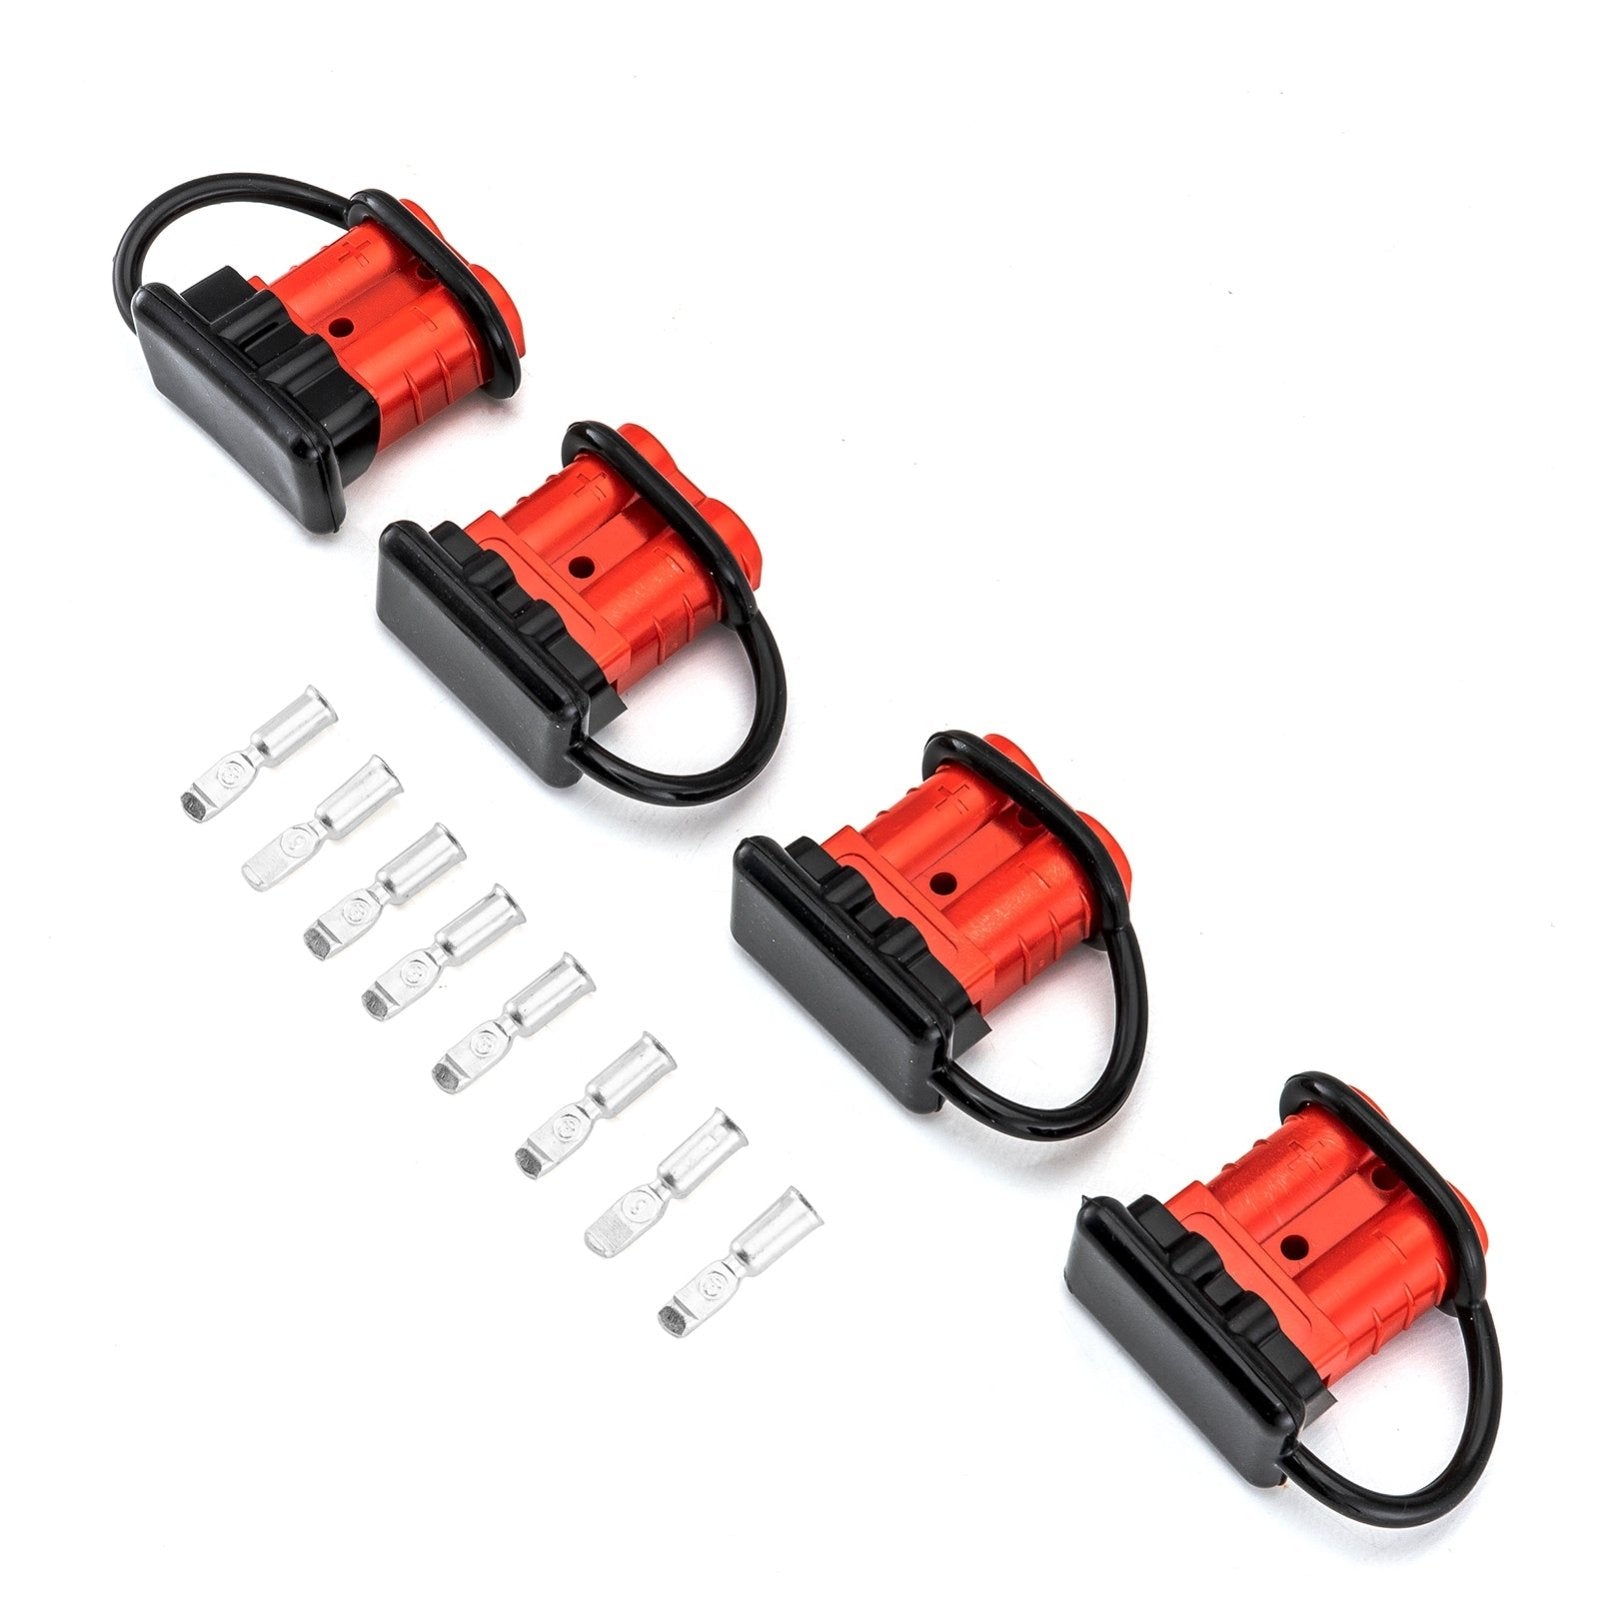 Car Turck ATV RV Boat Winch Lift Motor Crane Battery Quick Connect Disconnect Electrical Plug Kit (4 Pack) - Weisen